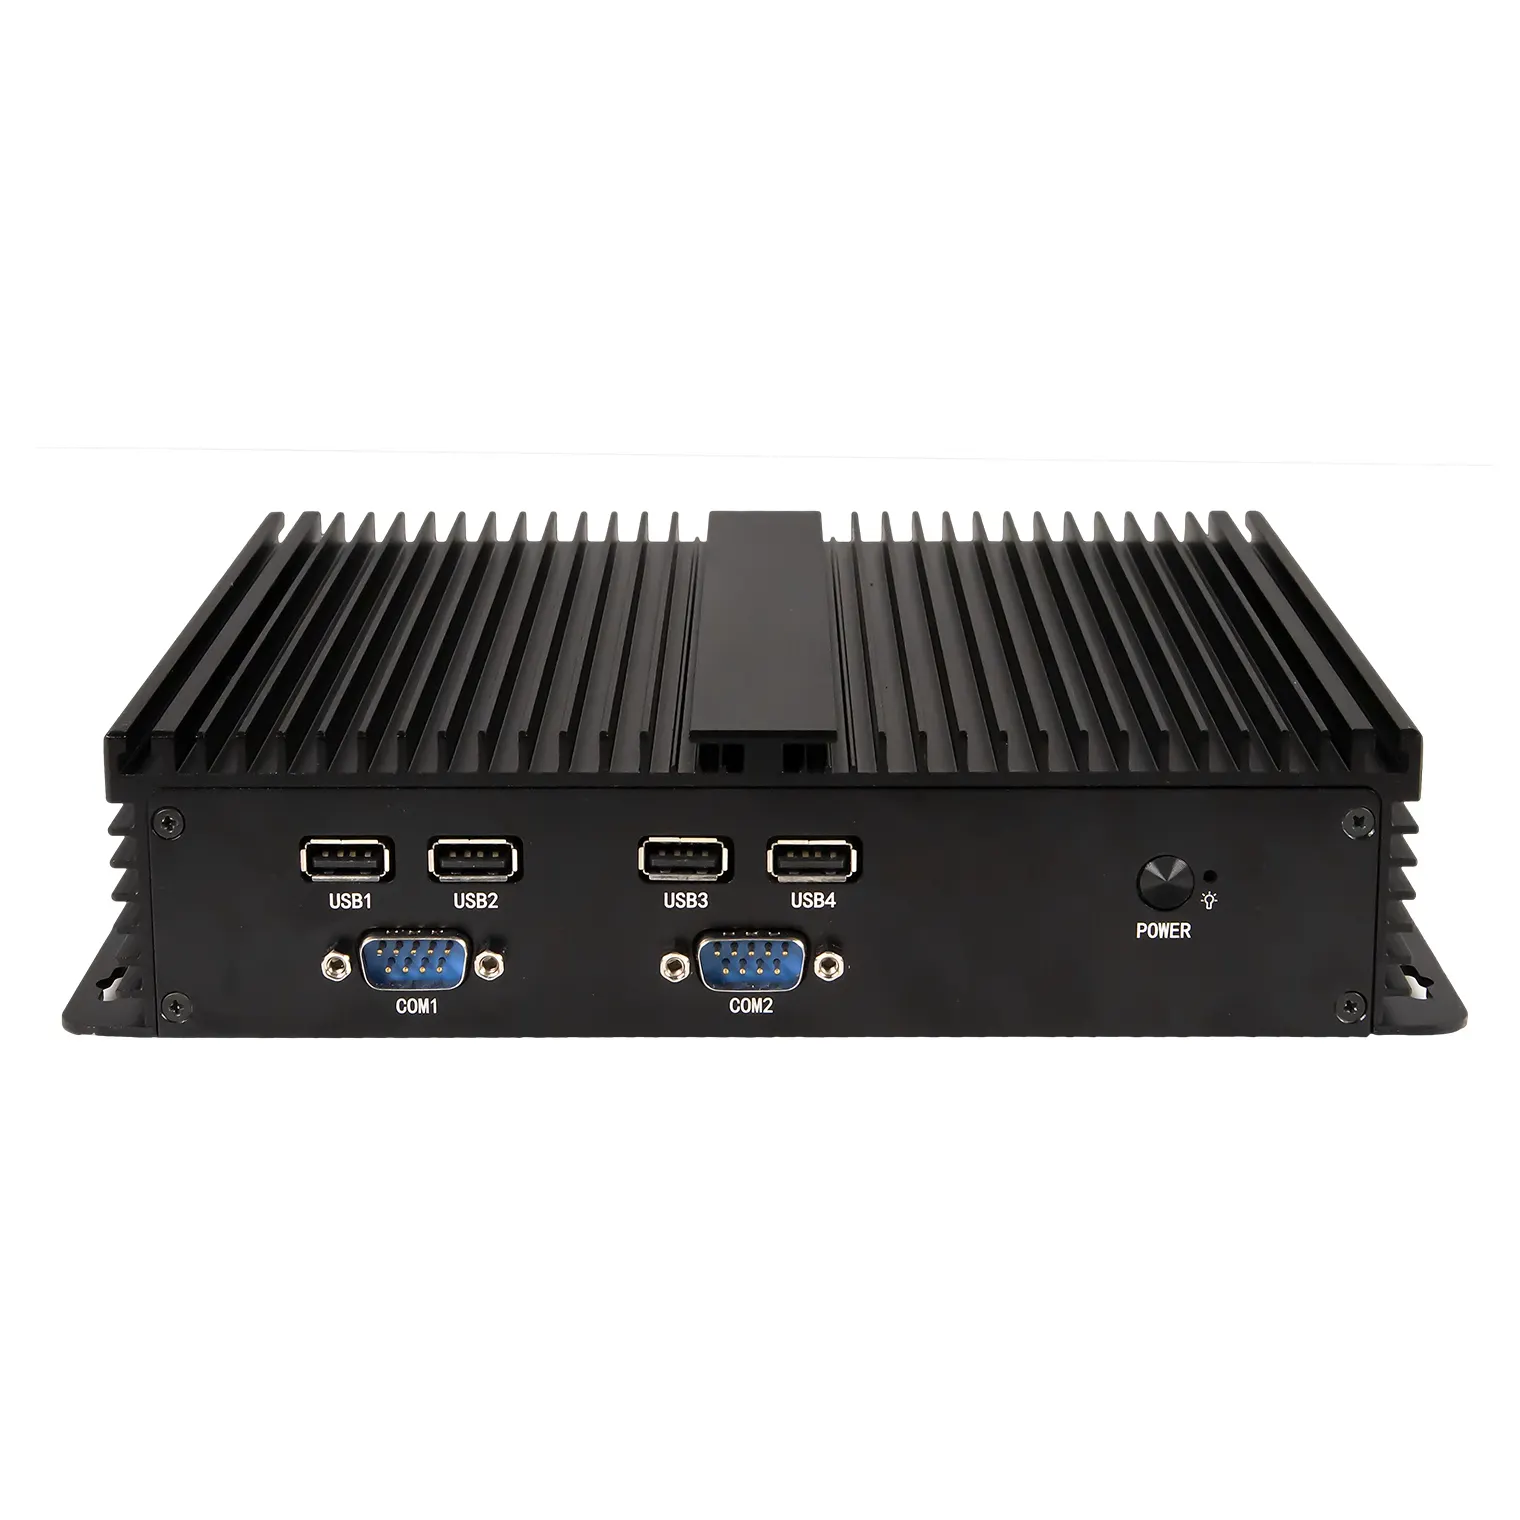 Wholesale Customized Linux Embedded Box Pc Embedded Desktop Small Computer Fanless Mini